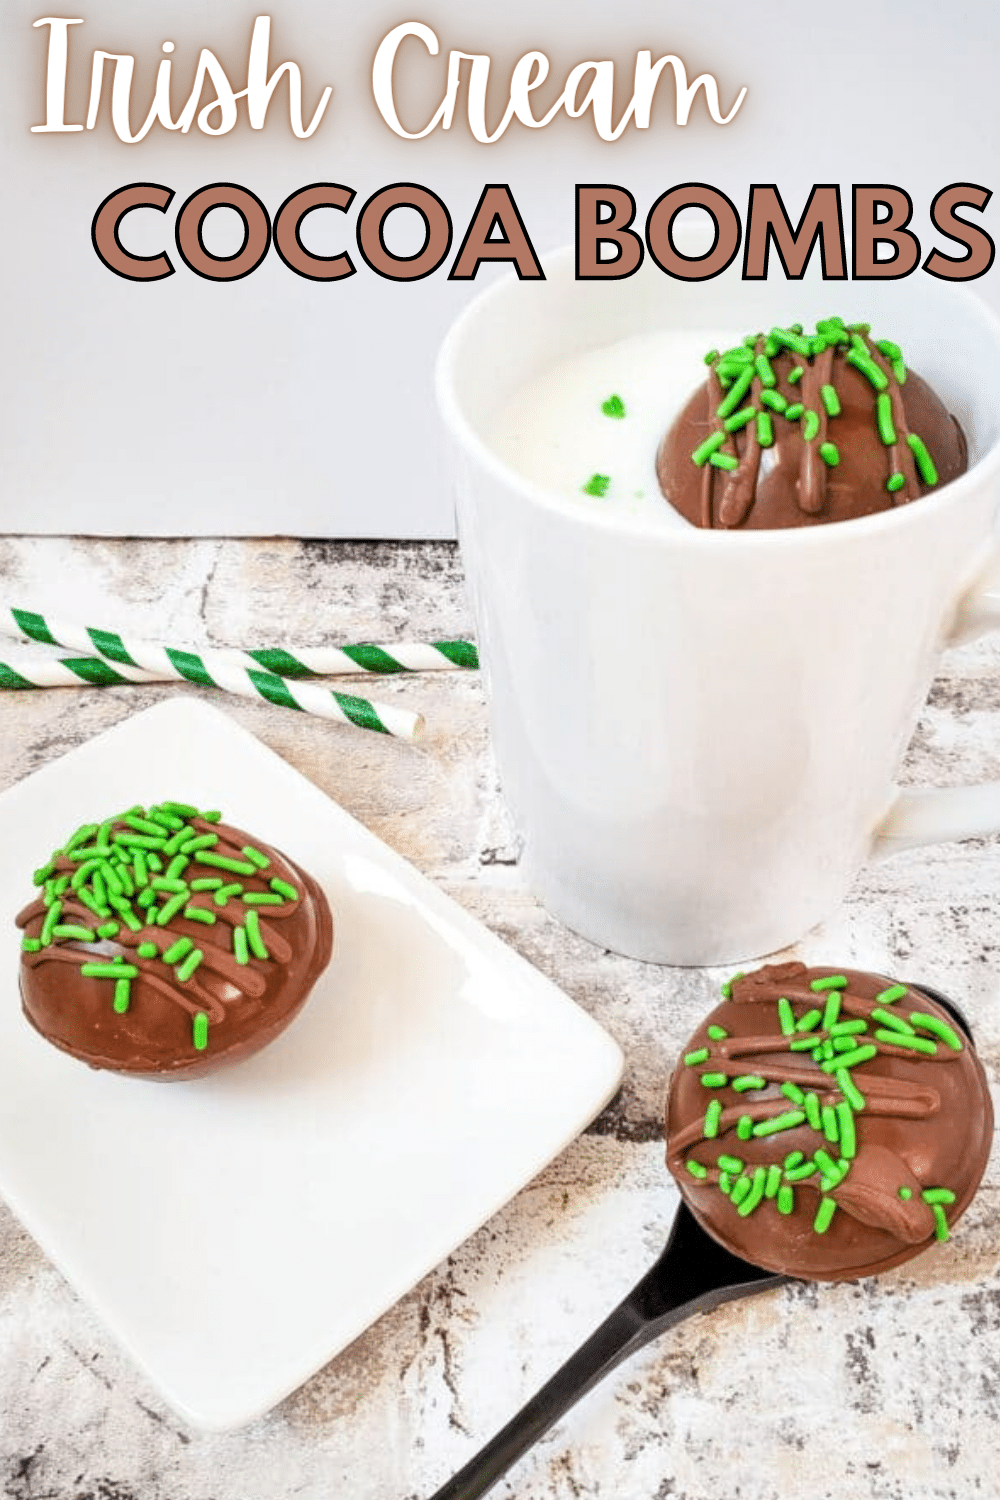 Looking for a tasty treat for just the 21 and over crowd? These Irish Cream Liqueur Hot Cocoa Bombs are the perfect way to warm up fast! #hotcocoabombs #irishcream #hotcocoa #hotchocolate #liqueur via @wondermomwannab